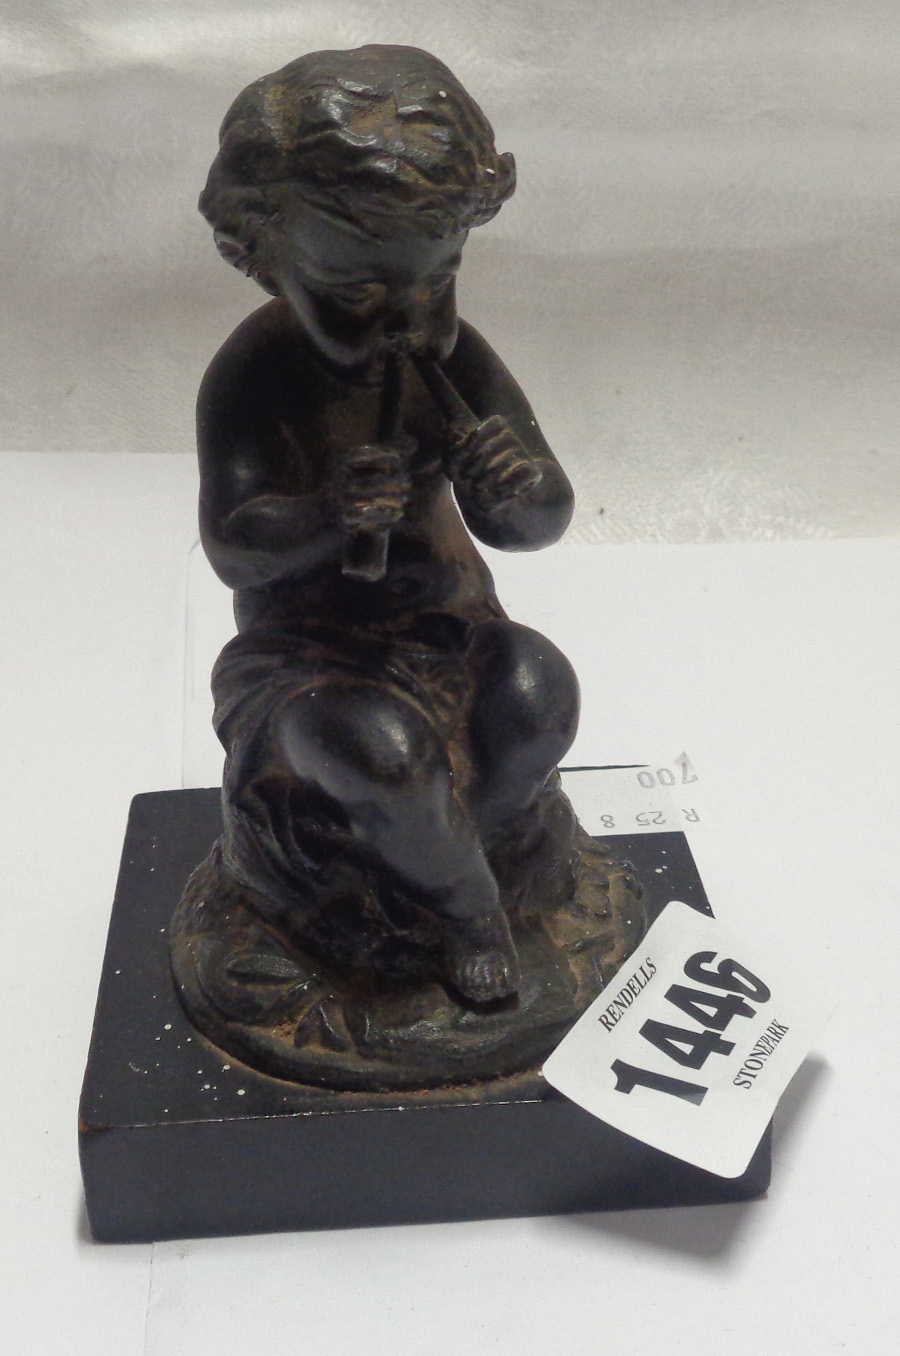 A small spelter figure depicting a child playing the pipes with antique finish, set on ebonised wood